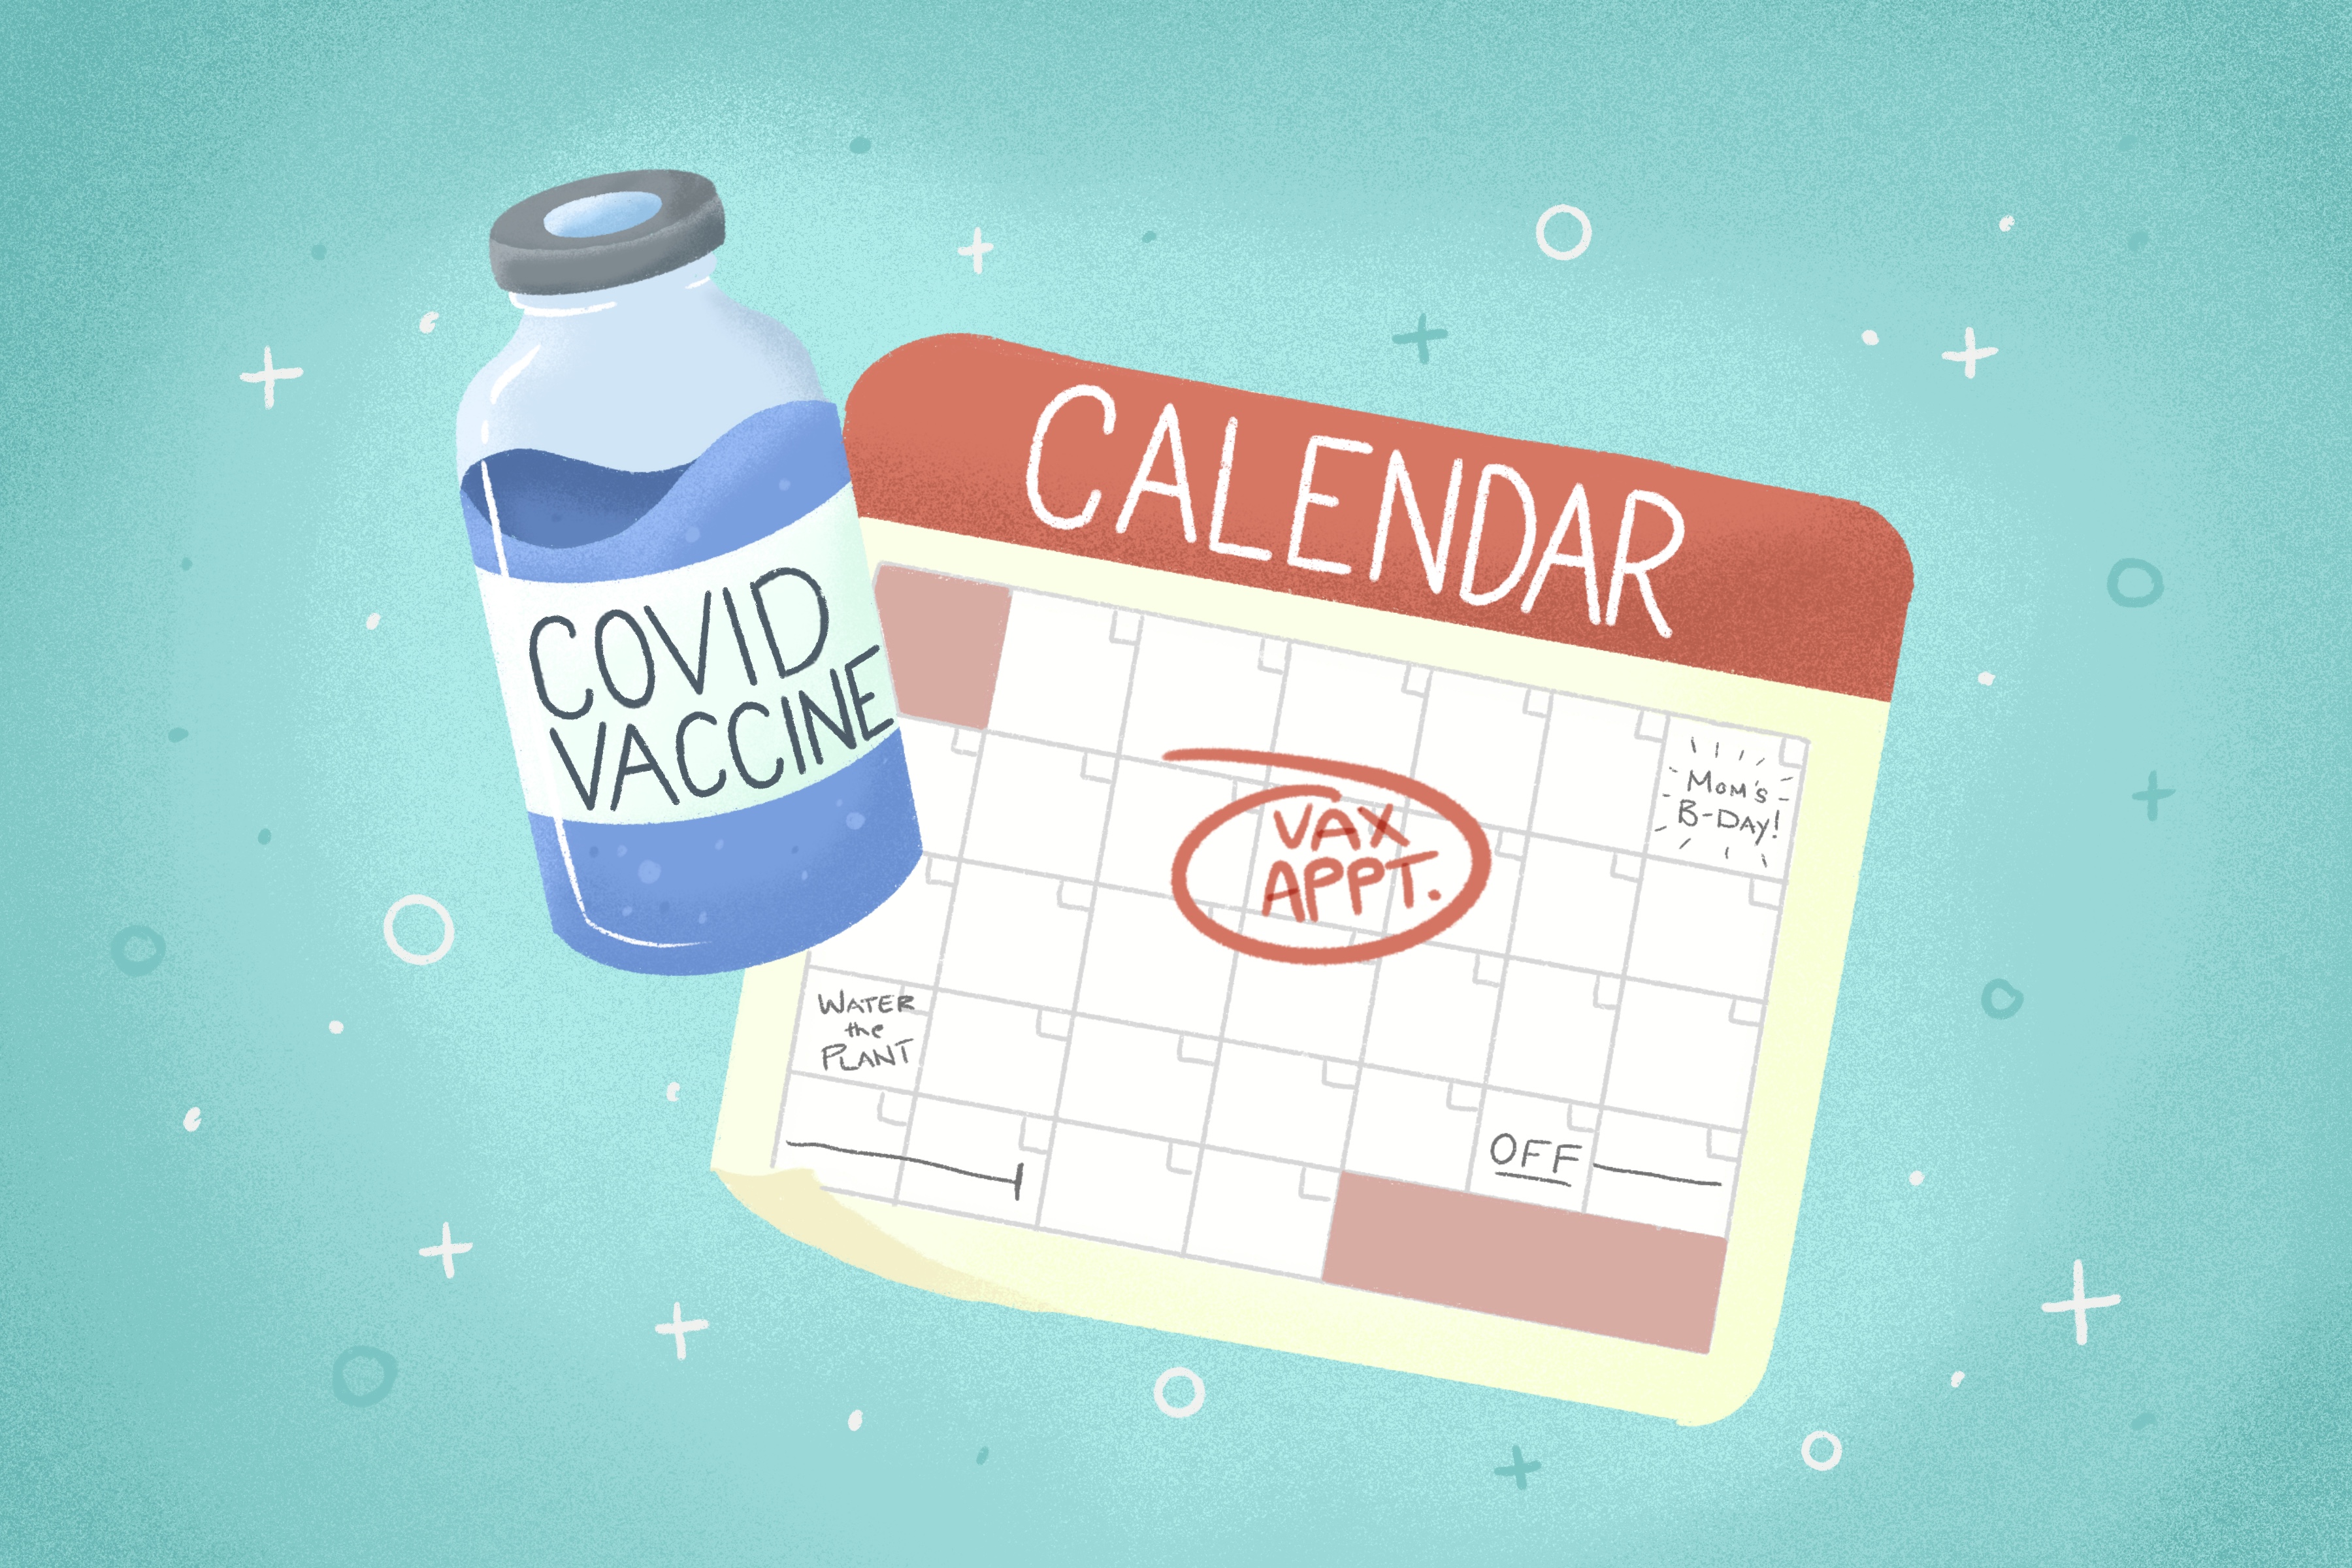 Get your COVID-19 vaccine appointment on the calendar